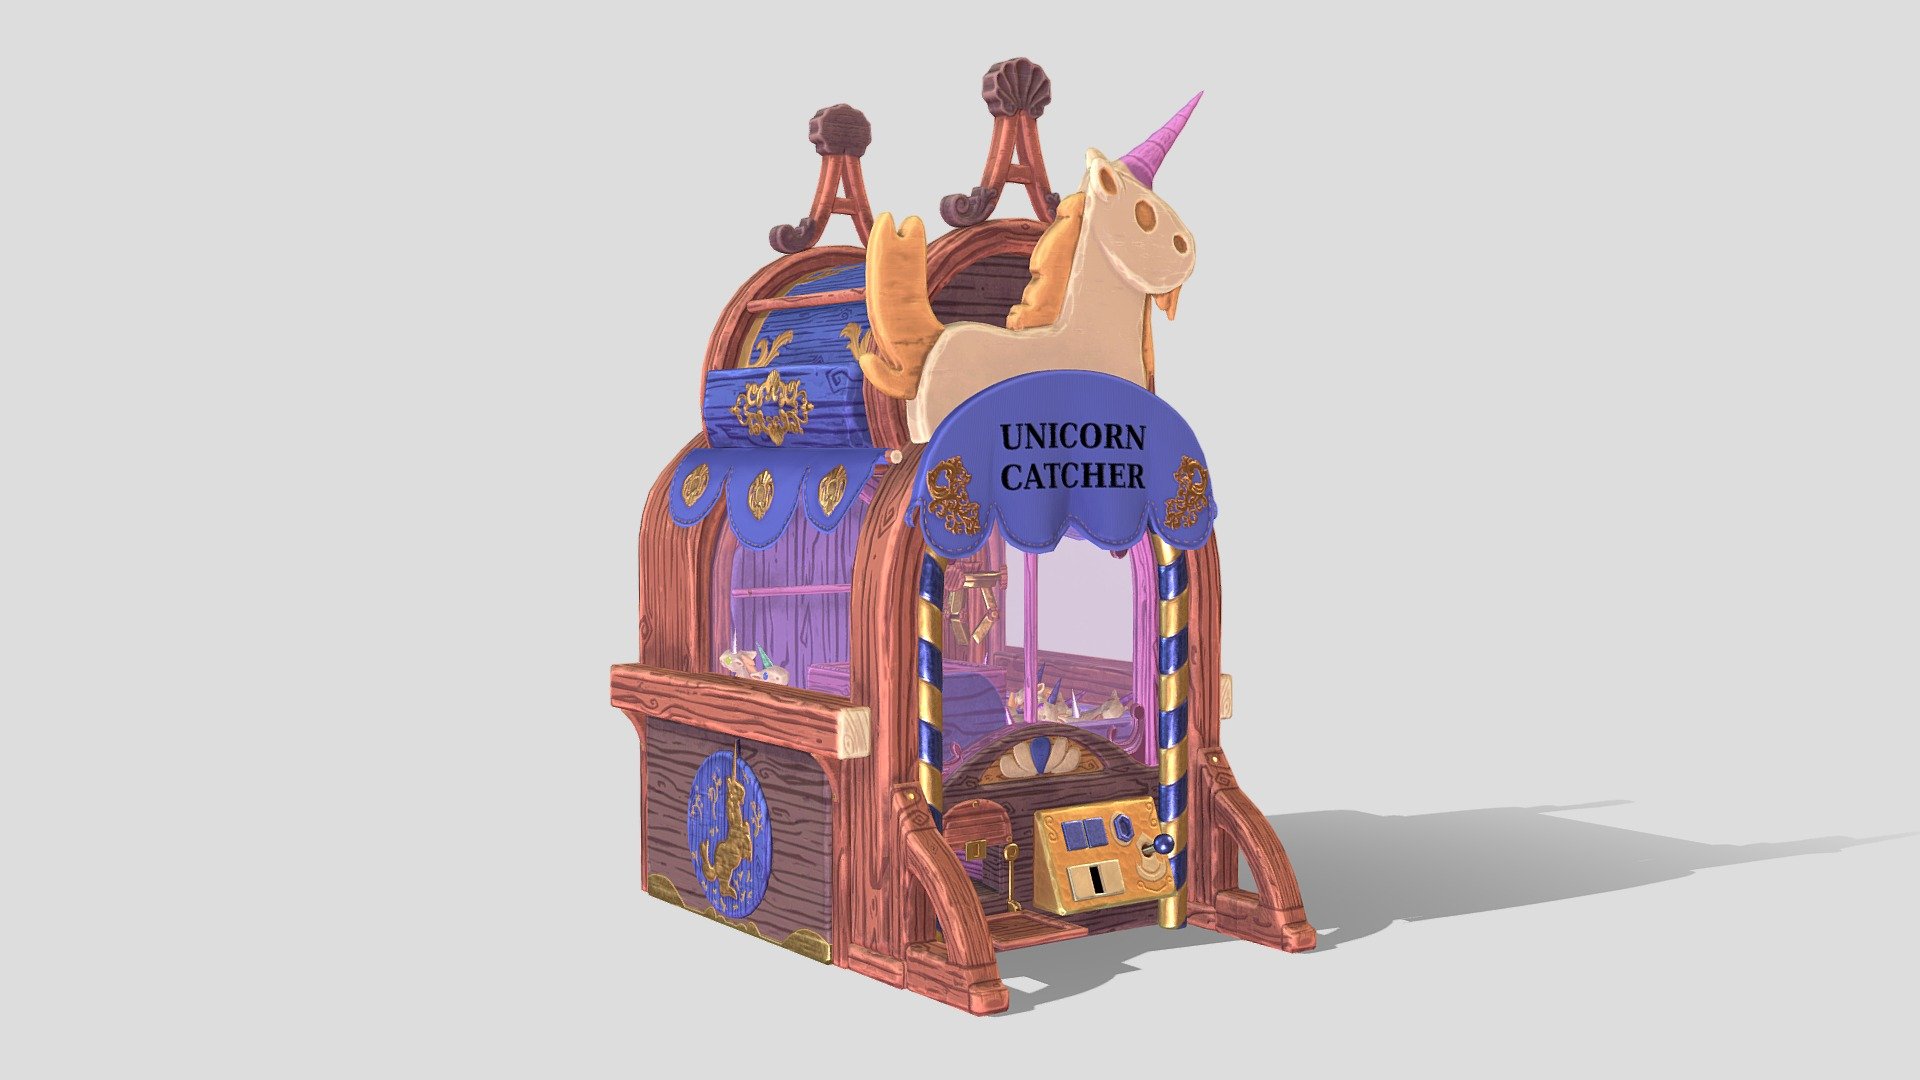 Hello everyone, I made this model of a cute Unicorn Claw Machine following a design by the artist Julie Perez for the medieval back-and-forth challenge on Artstation.

The polycount for the full model and the 4 little wooden horse is 47972. I don't know how you'd manage to spawn so many little unicorn wooden toys in a game, so the full polycount is way higher on my take. I bet you could just use particles or an equivalent to avoid the extra triangles.

I also did that demonstration animation, to show how eveything could work but of course in a game that'd be done with programming not actual bones, haha.

I hope you enjoy it ! - Medieval Claw Machine - Unicorn Catcher - 3D model by Mariane13 3d model